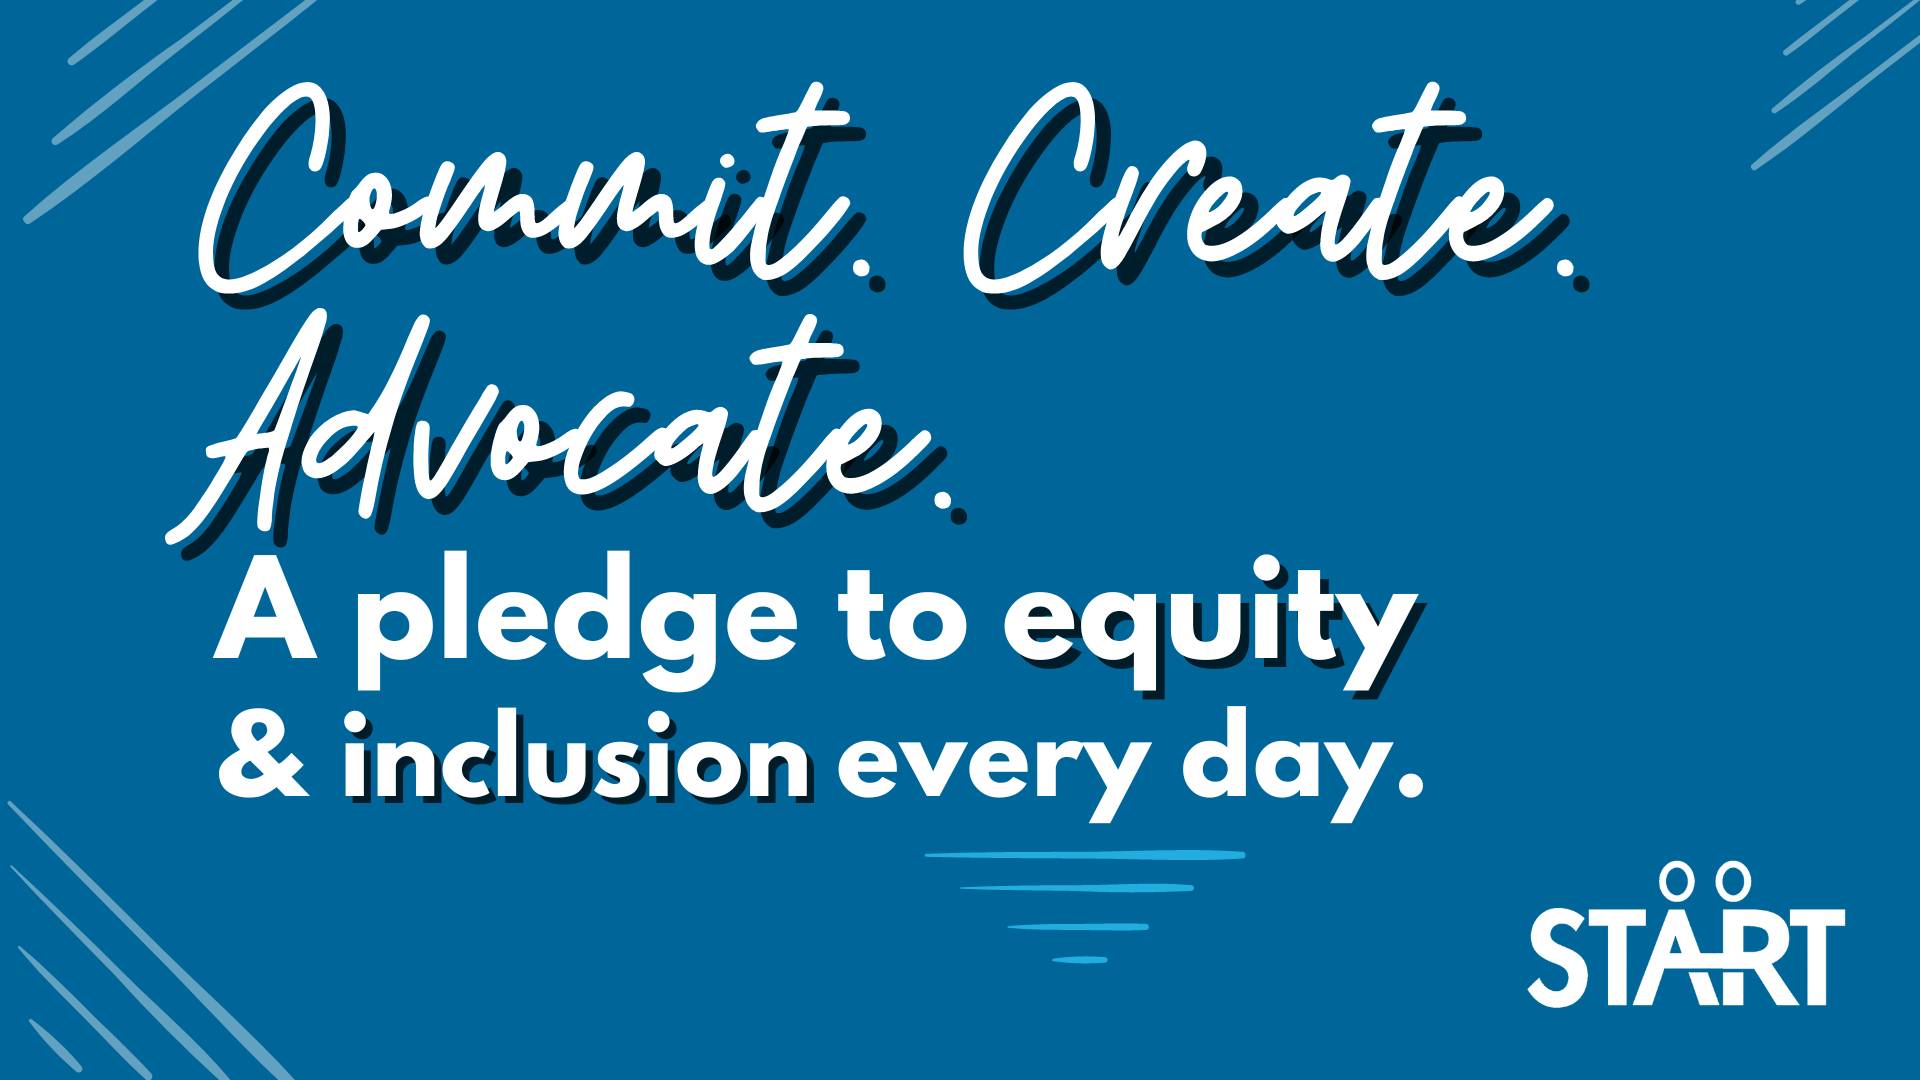 Commit. Create. Advocate. ASD 365: A pledge to equity and inclusion every day.